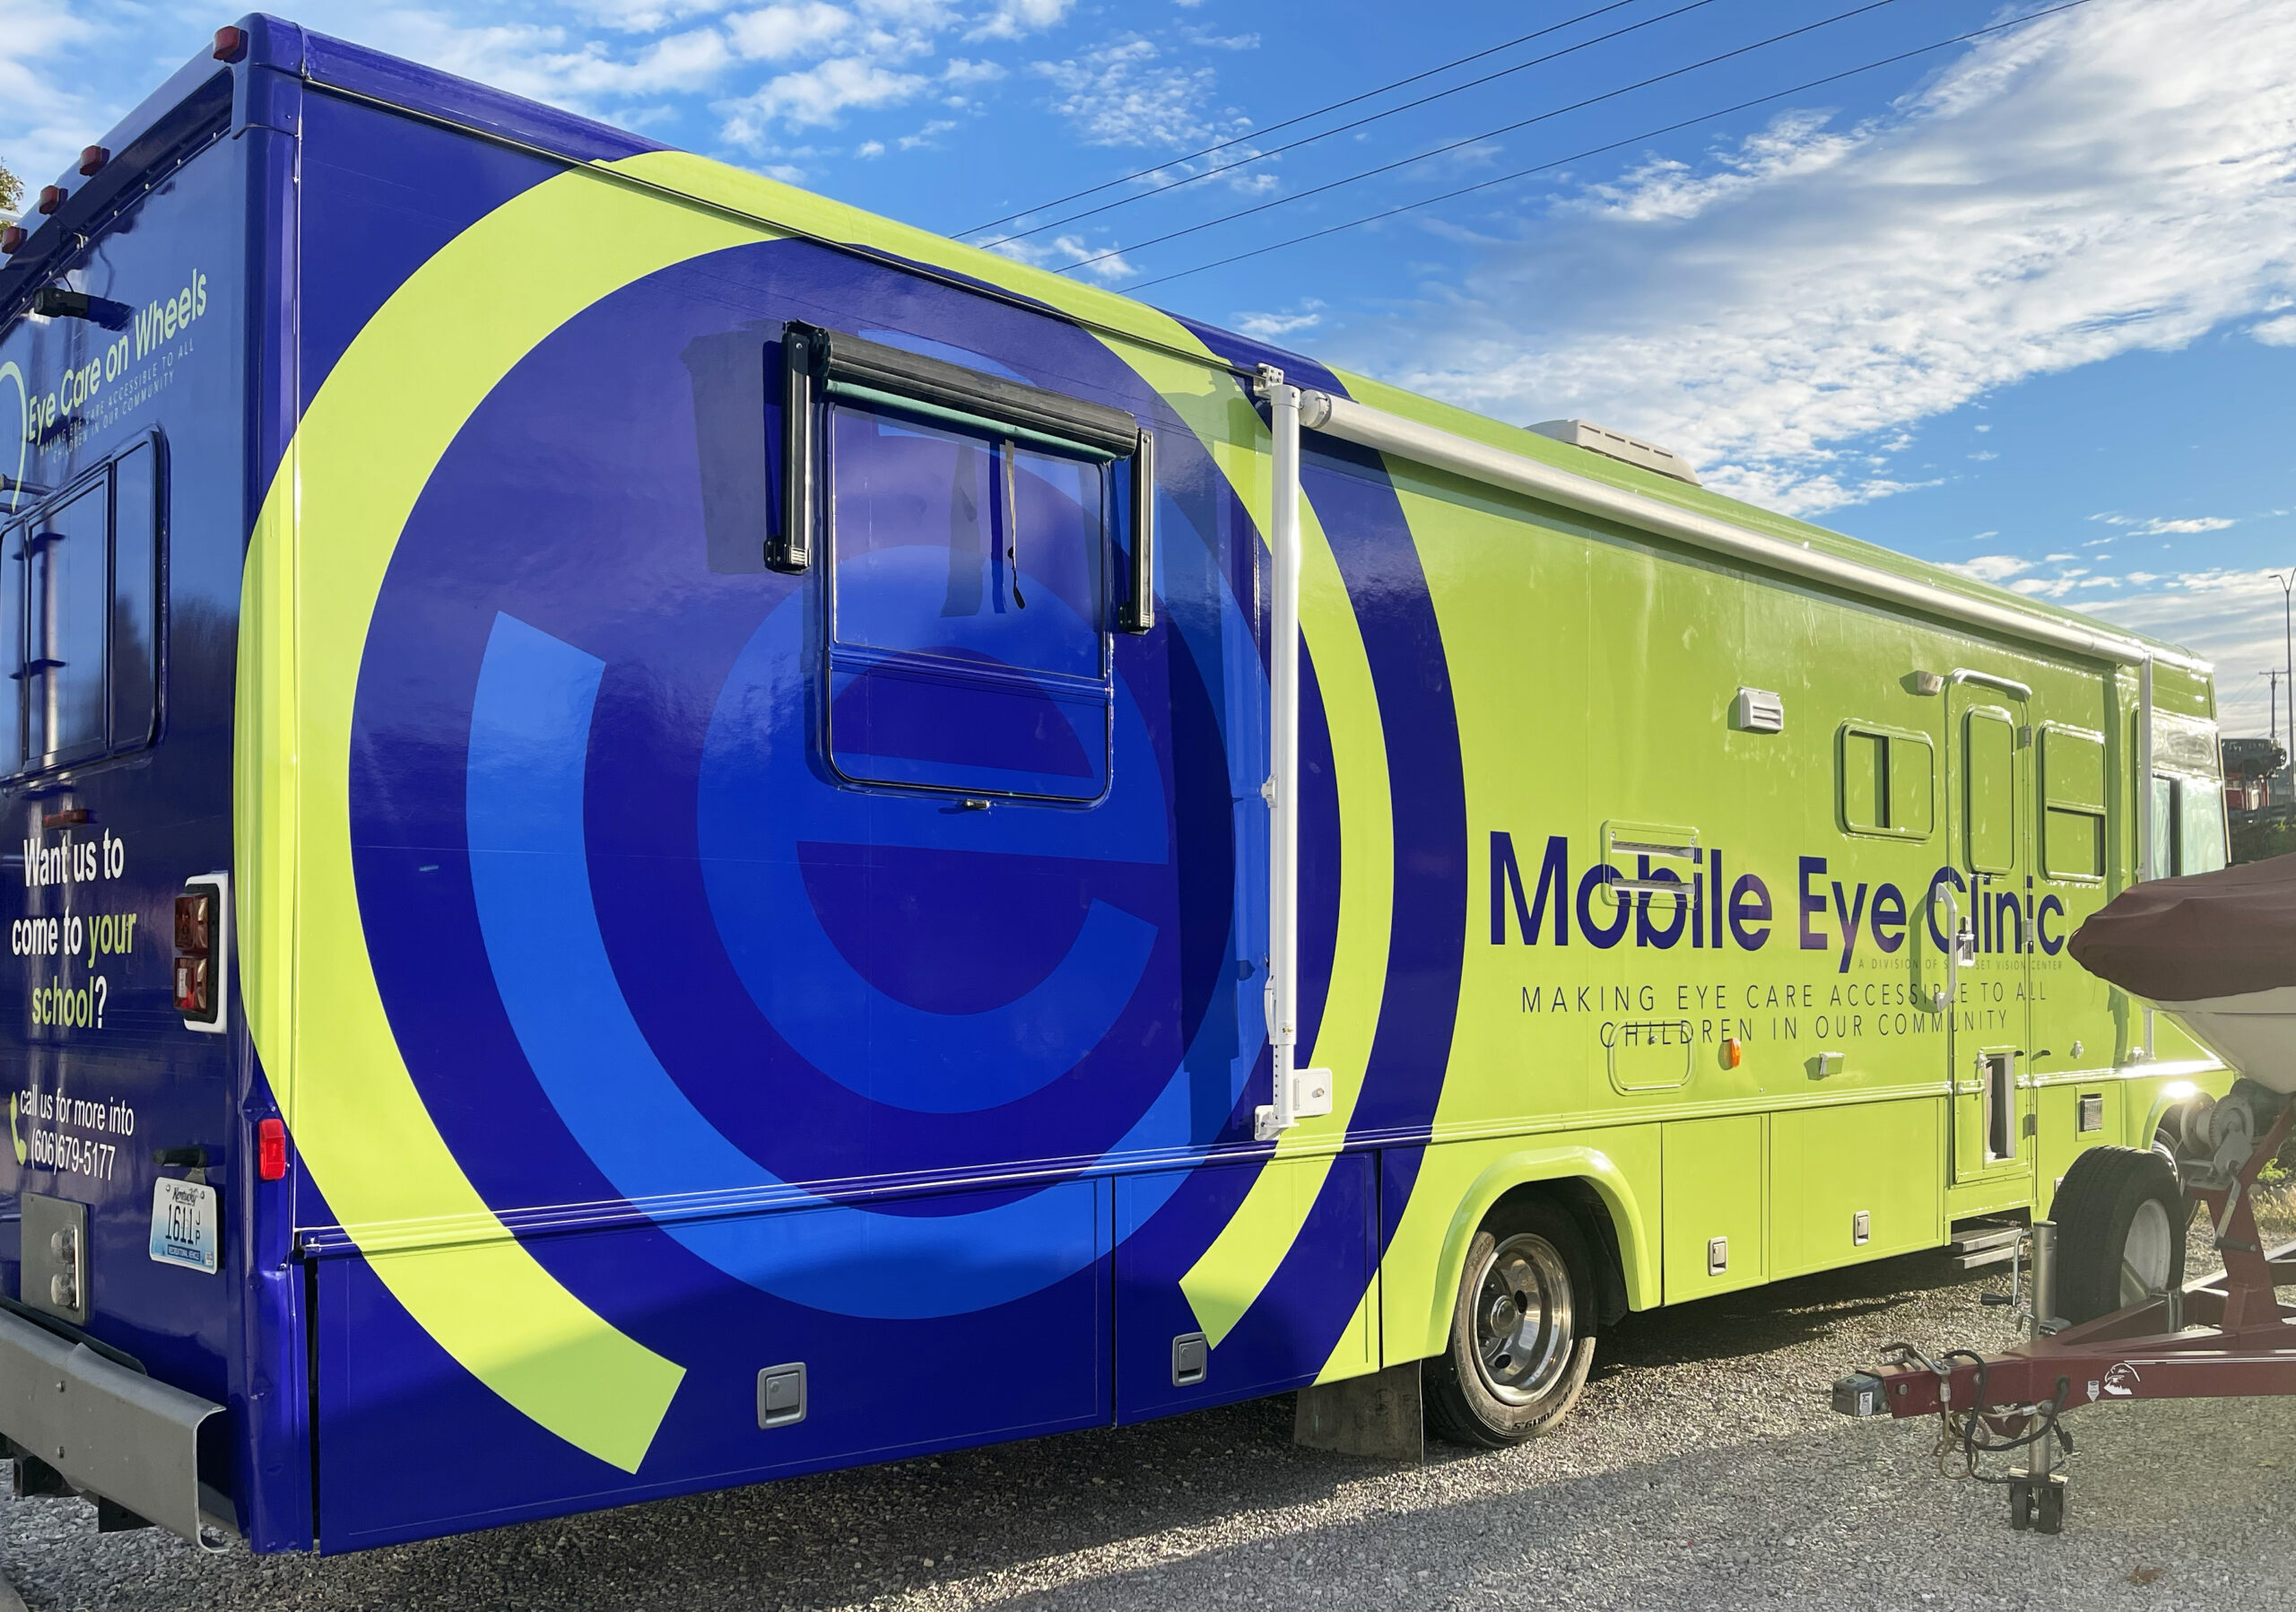 Recreational vehicle wrapped in blue and green graphics promoting mobile eye care unit